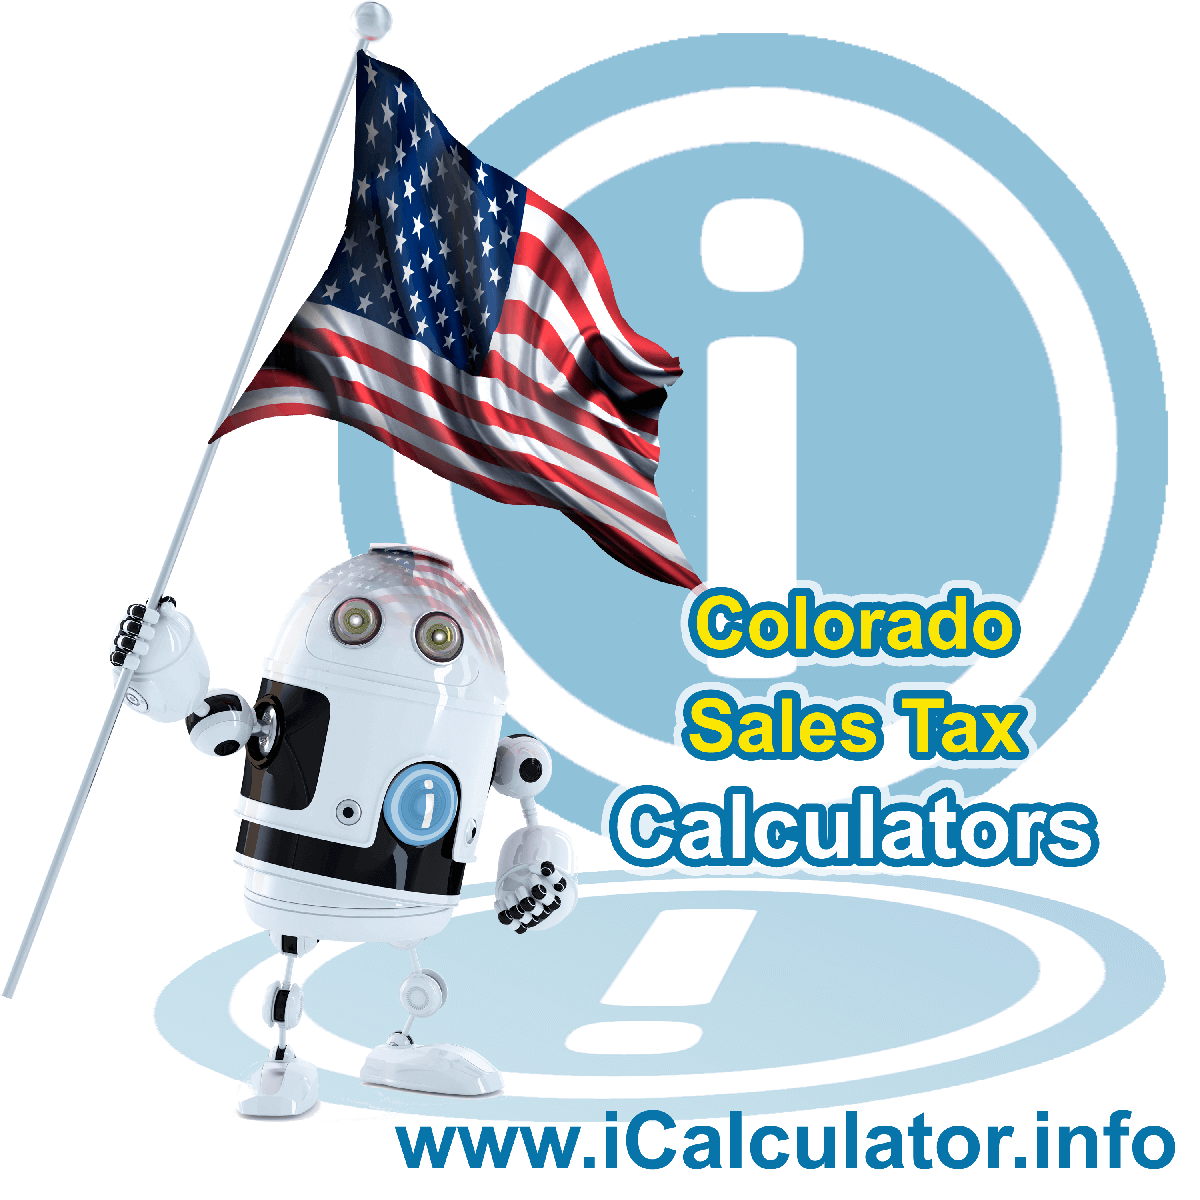 Eaton Sales Rates: This image illustrates a calculator robot calculating Eaton sales tax manually using the Eaton Sales Tax Formula. You can use this information to calculate Eaton Sales Tax manually or use the Eaton Sales Tax Calculator to calculate sales tax online.